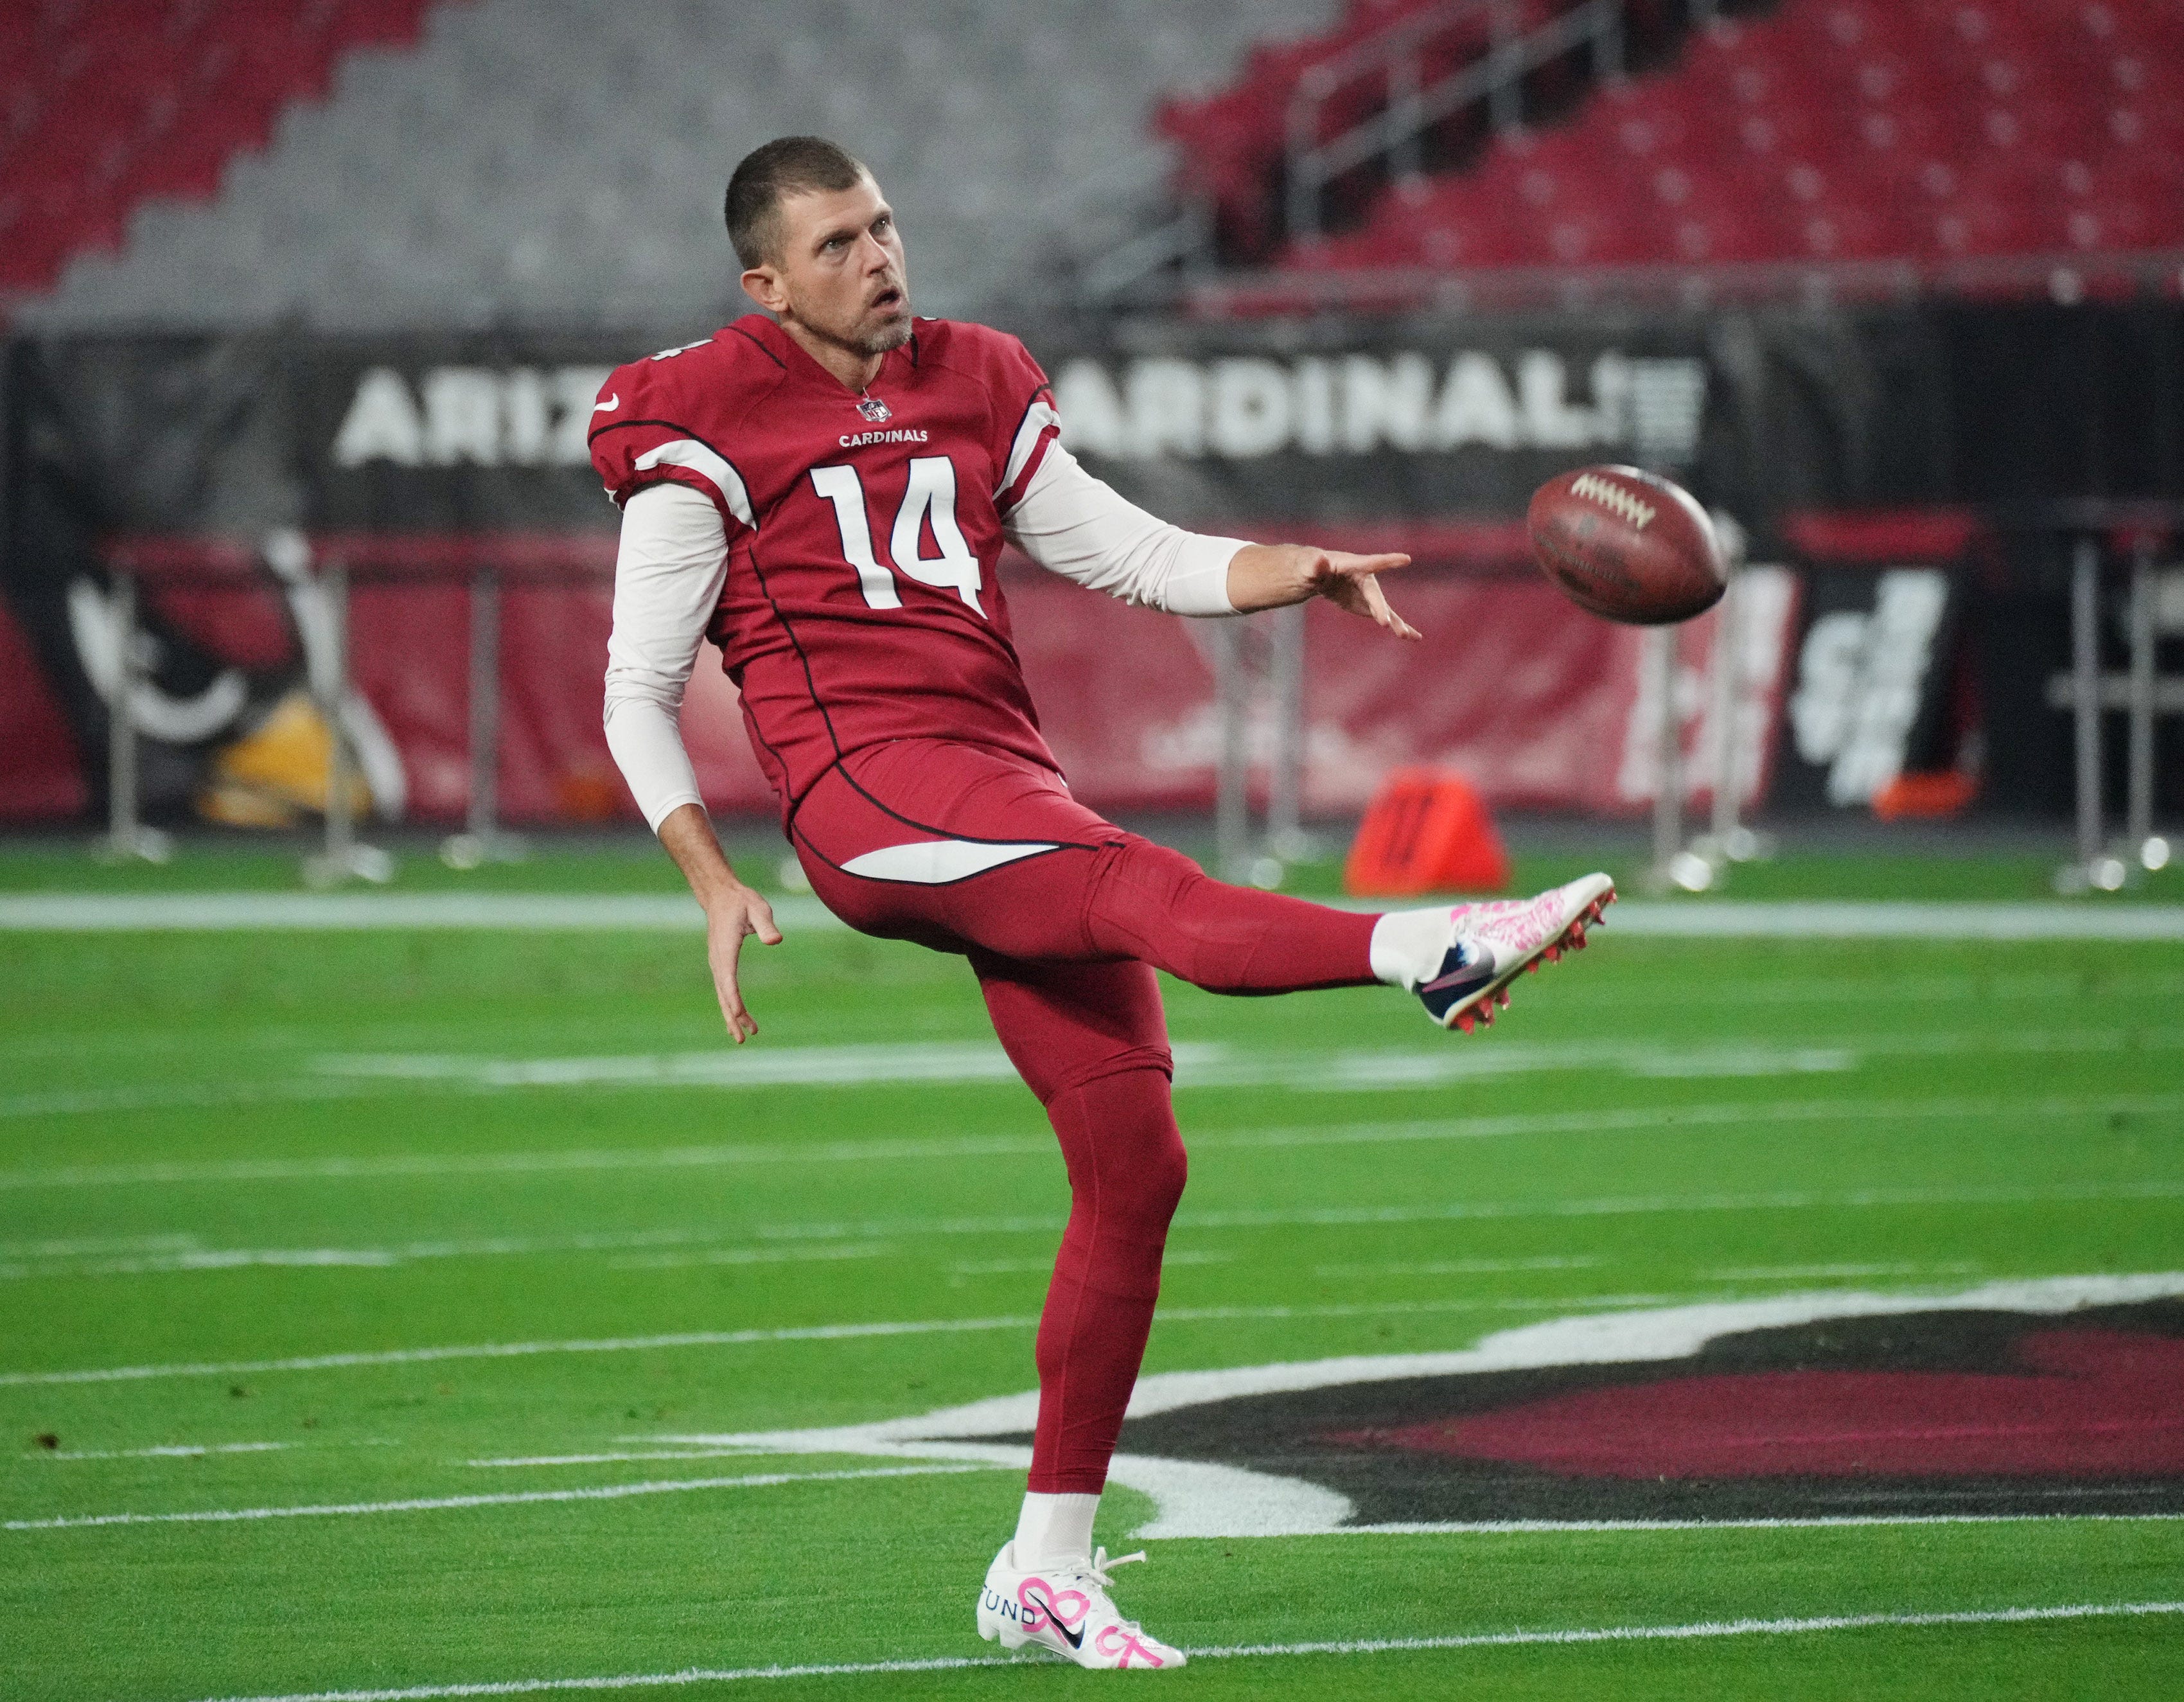 Cardinals re-sign long snapper Brewer, agree to terms with punter Lee